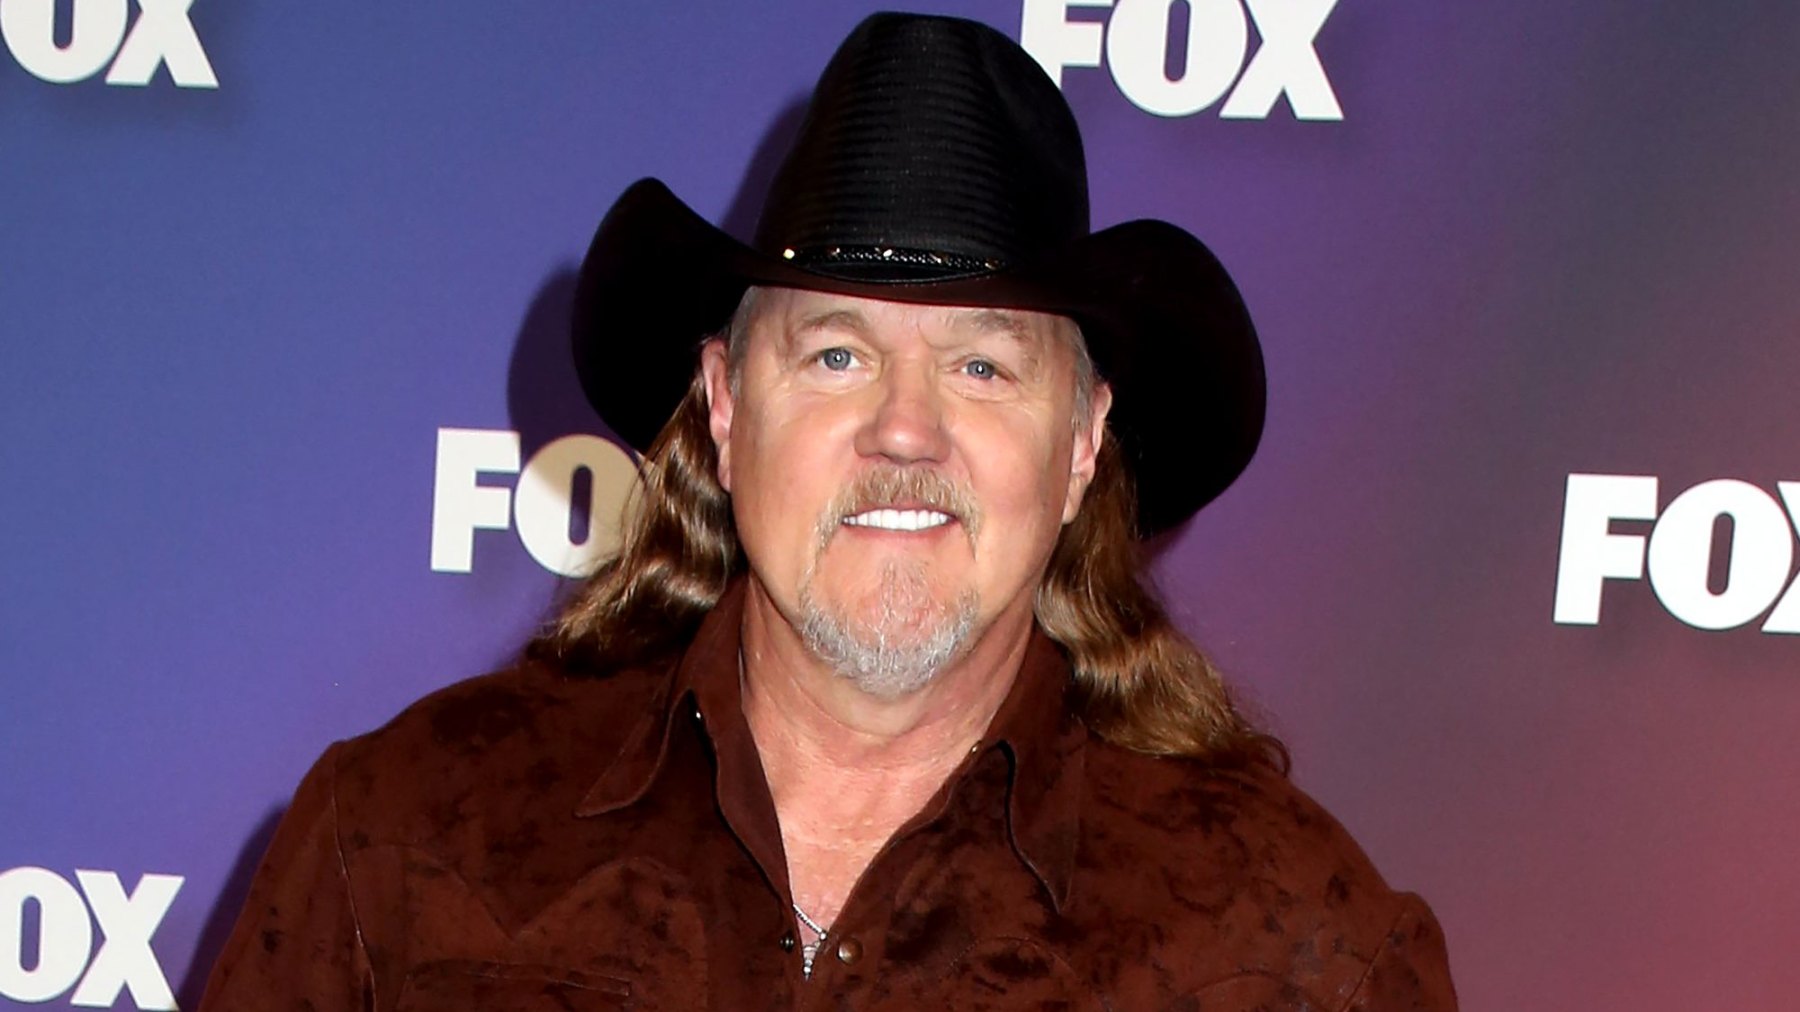 Trace Adkins 25 Things You Don't Know About Me UsWeekly